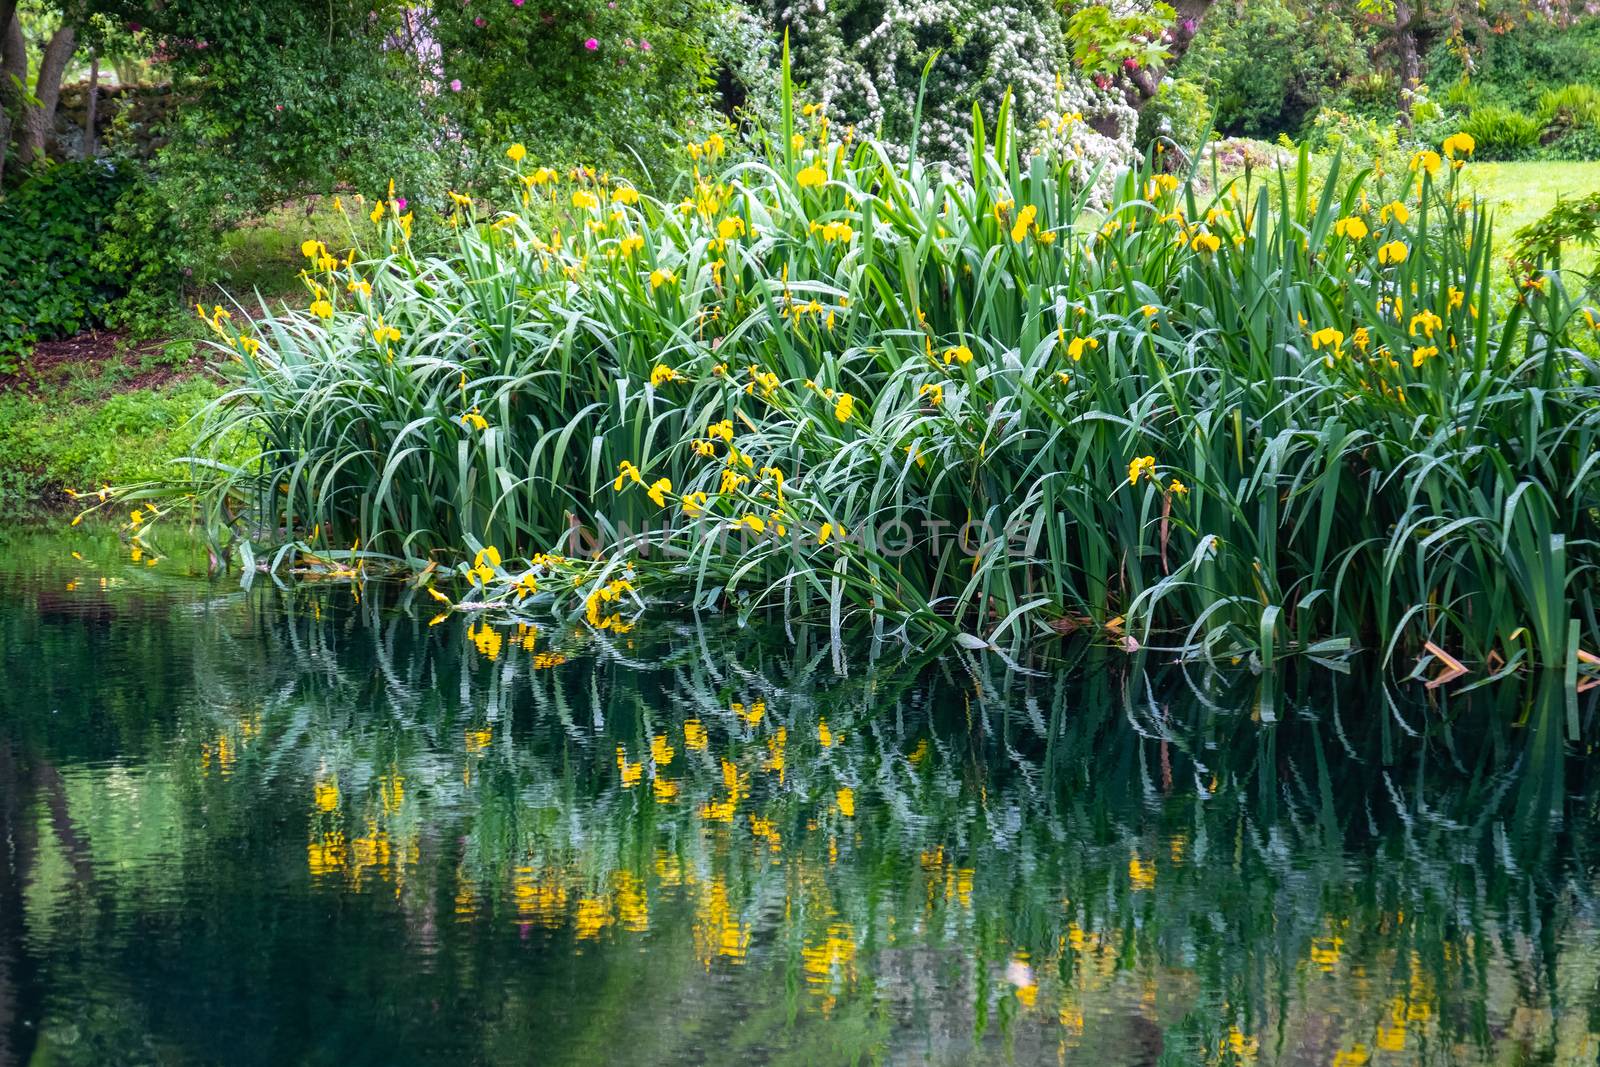 grass and flower reflections on water on river shore impressionist garden pond horizontal background .